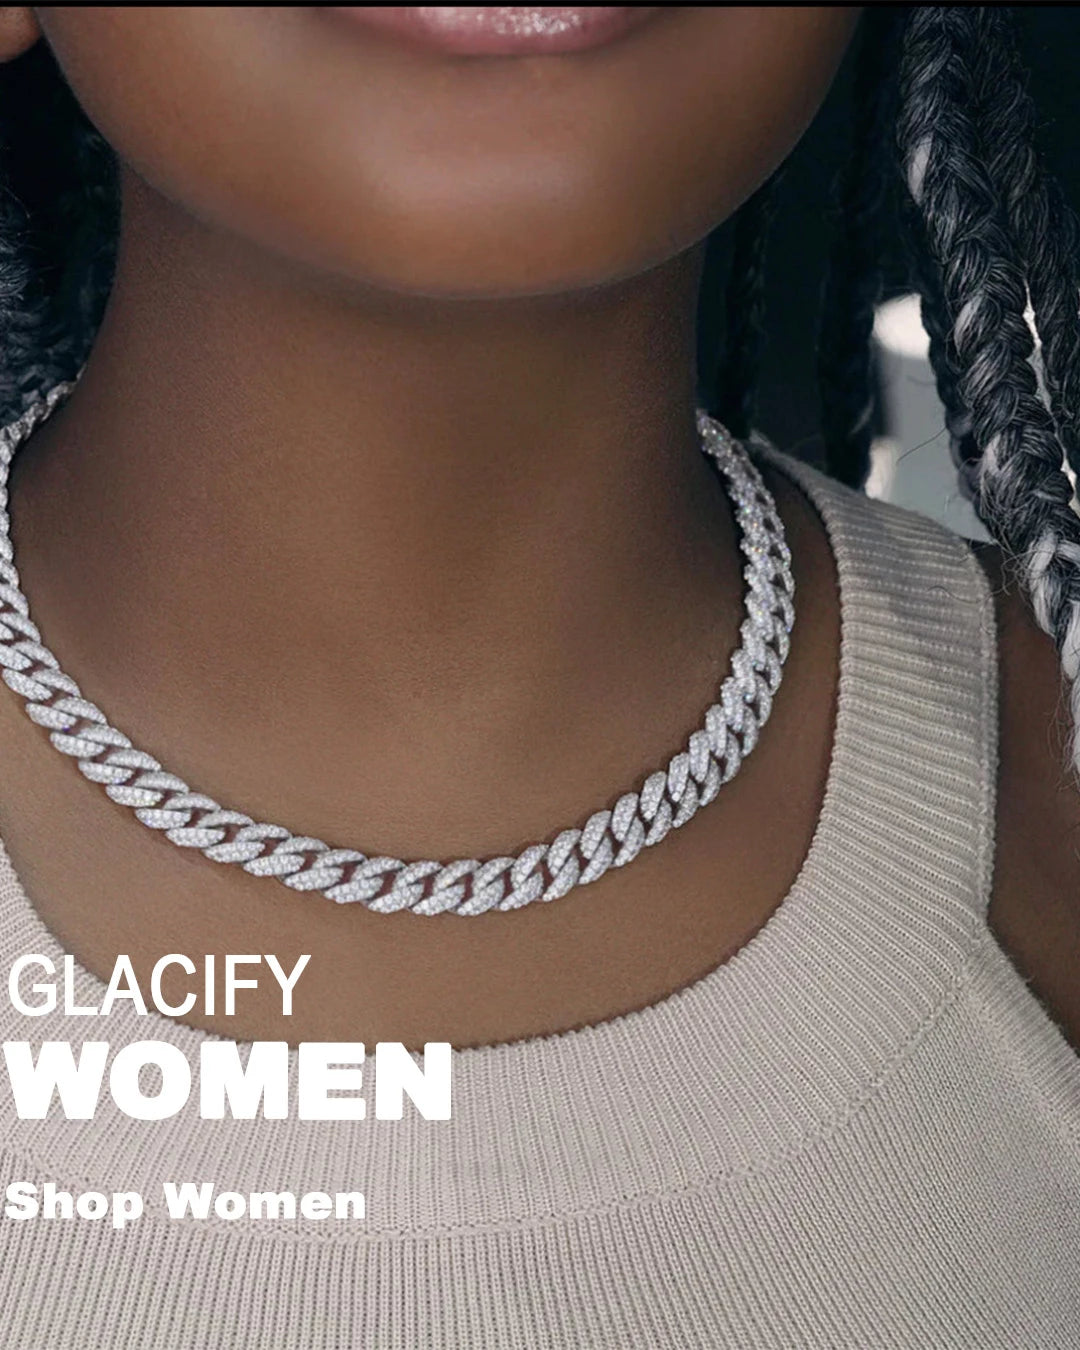 FOR HER - GLACIFY